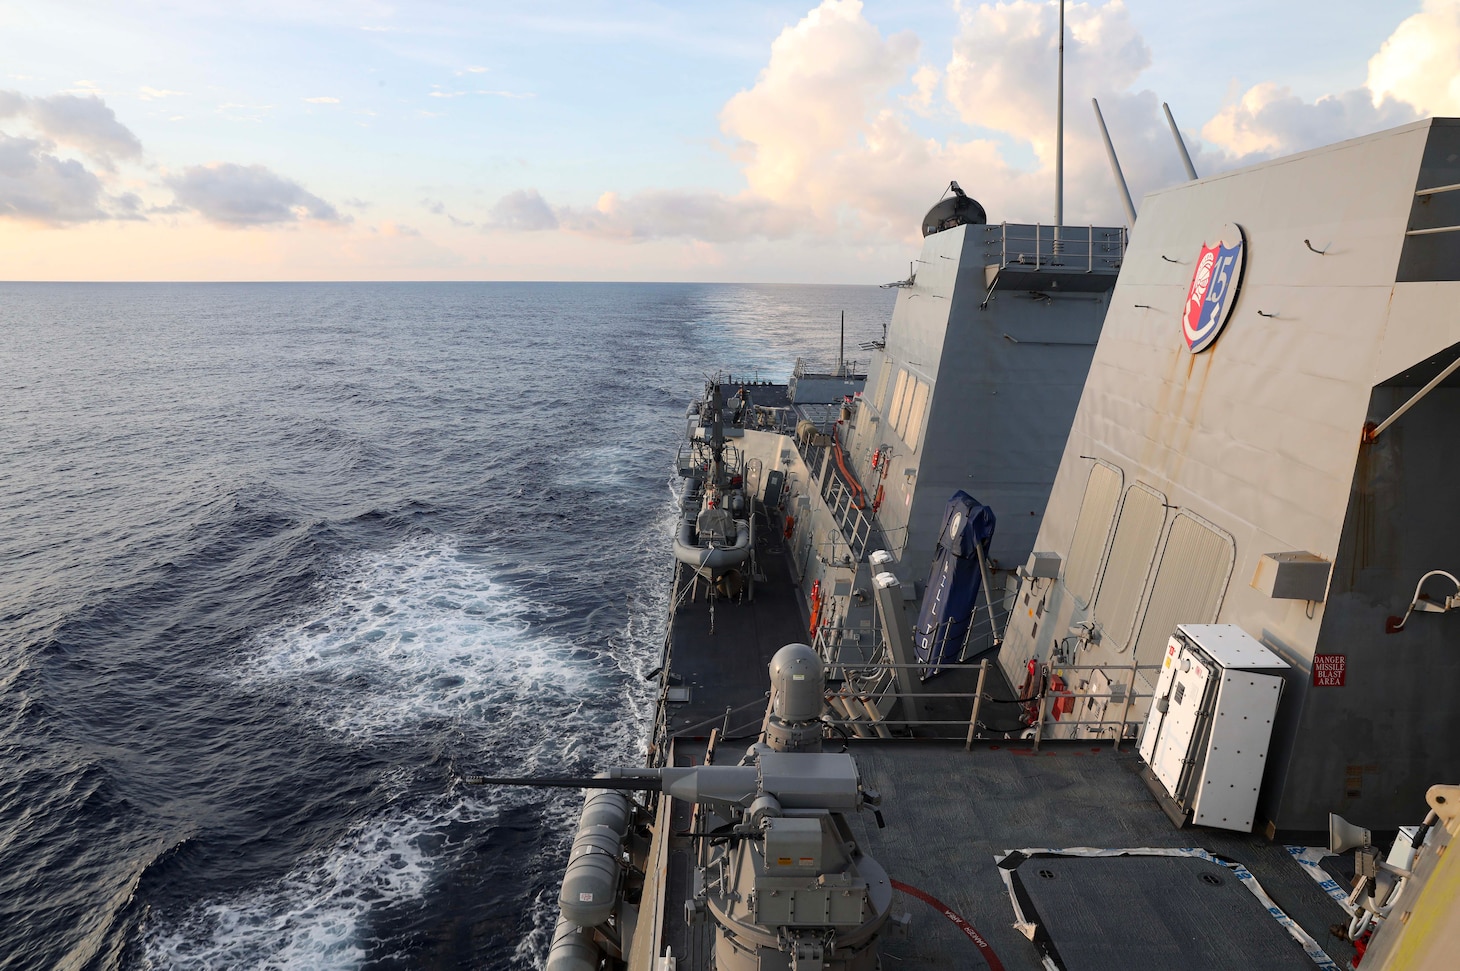 SOUTH CHINA SEA (Nov. 3, 2023) – The Arleigh Burke-class guided-missile destroyer USS Dewey (DDG 105) conducts routine underway operations. Dewey is forward-deployed and assigned to Commander, Task Force 71/Destroyer Squadron (DESRON) 15, the Navy’s largest DESRON and the U.S. 7th Fleet’s principal surface force. (U.S. Navy photo by Mass Communication Specialist 1st Class Greg Johnson)